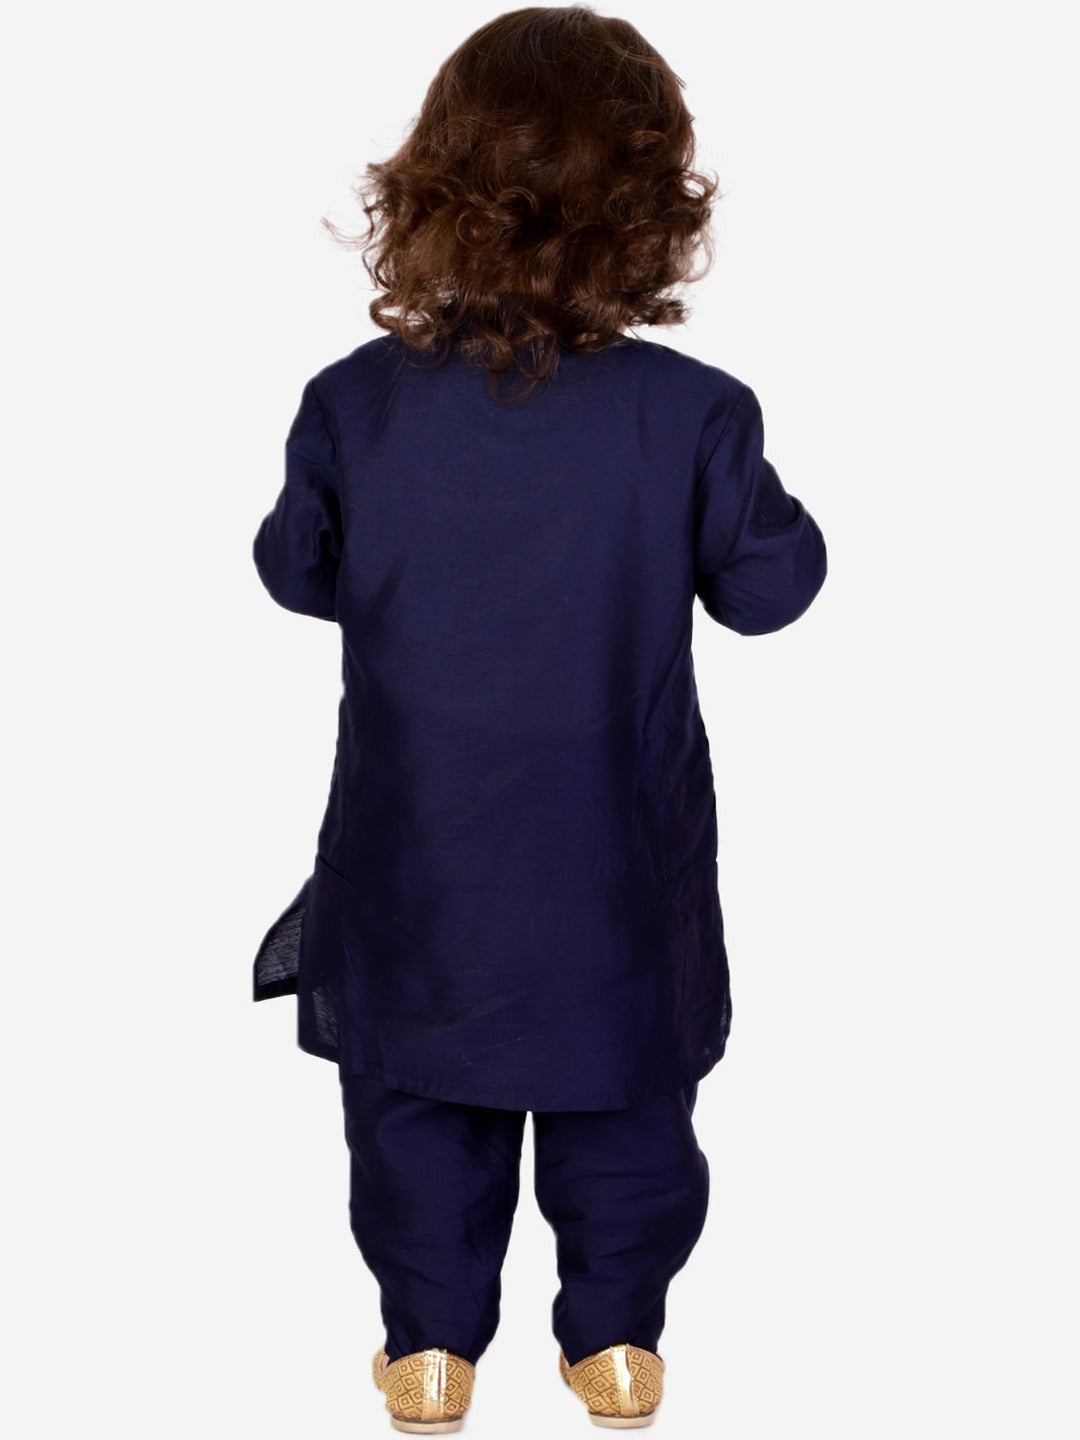 Kids Navy Blue Floral Embroidered Kurta | Traditional Indian Ethnic Wear